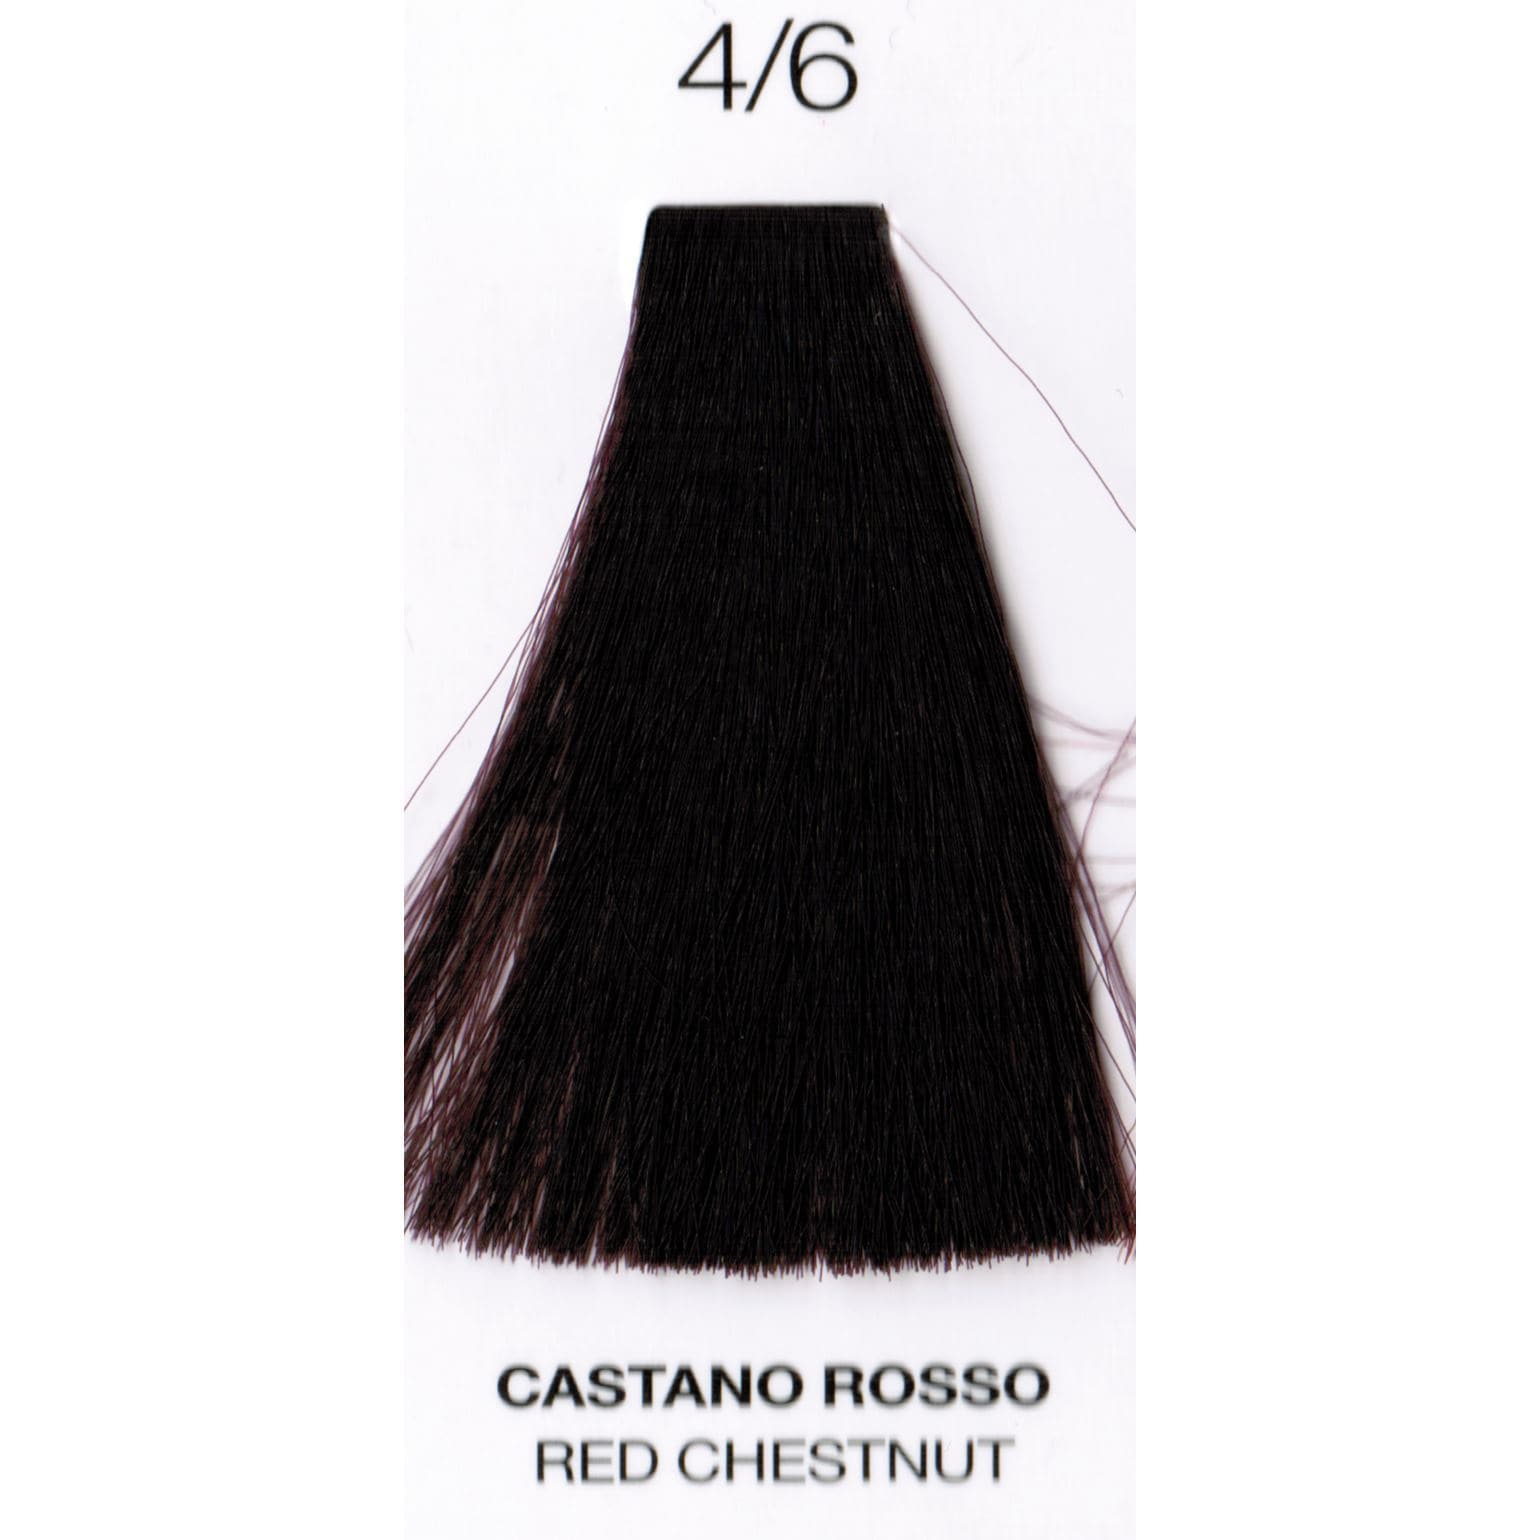 4/6 Red Chestnut | Purity | Ammonia-Free Permanent Hair Color HAIR COLOR OYSTER 